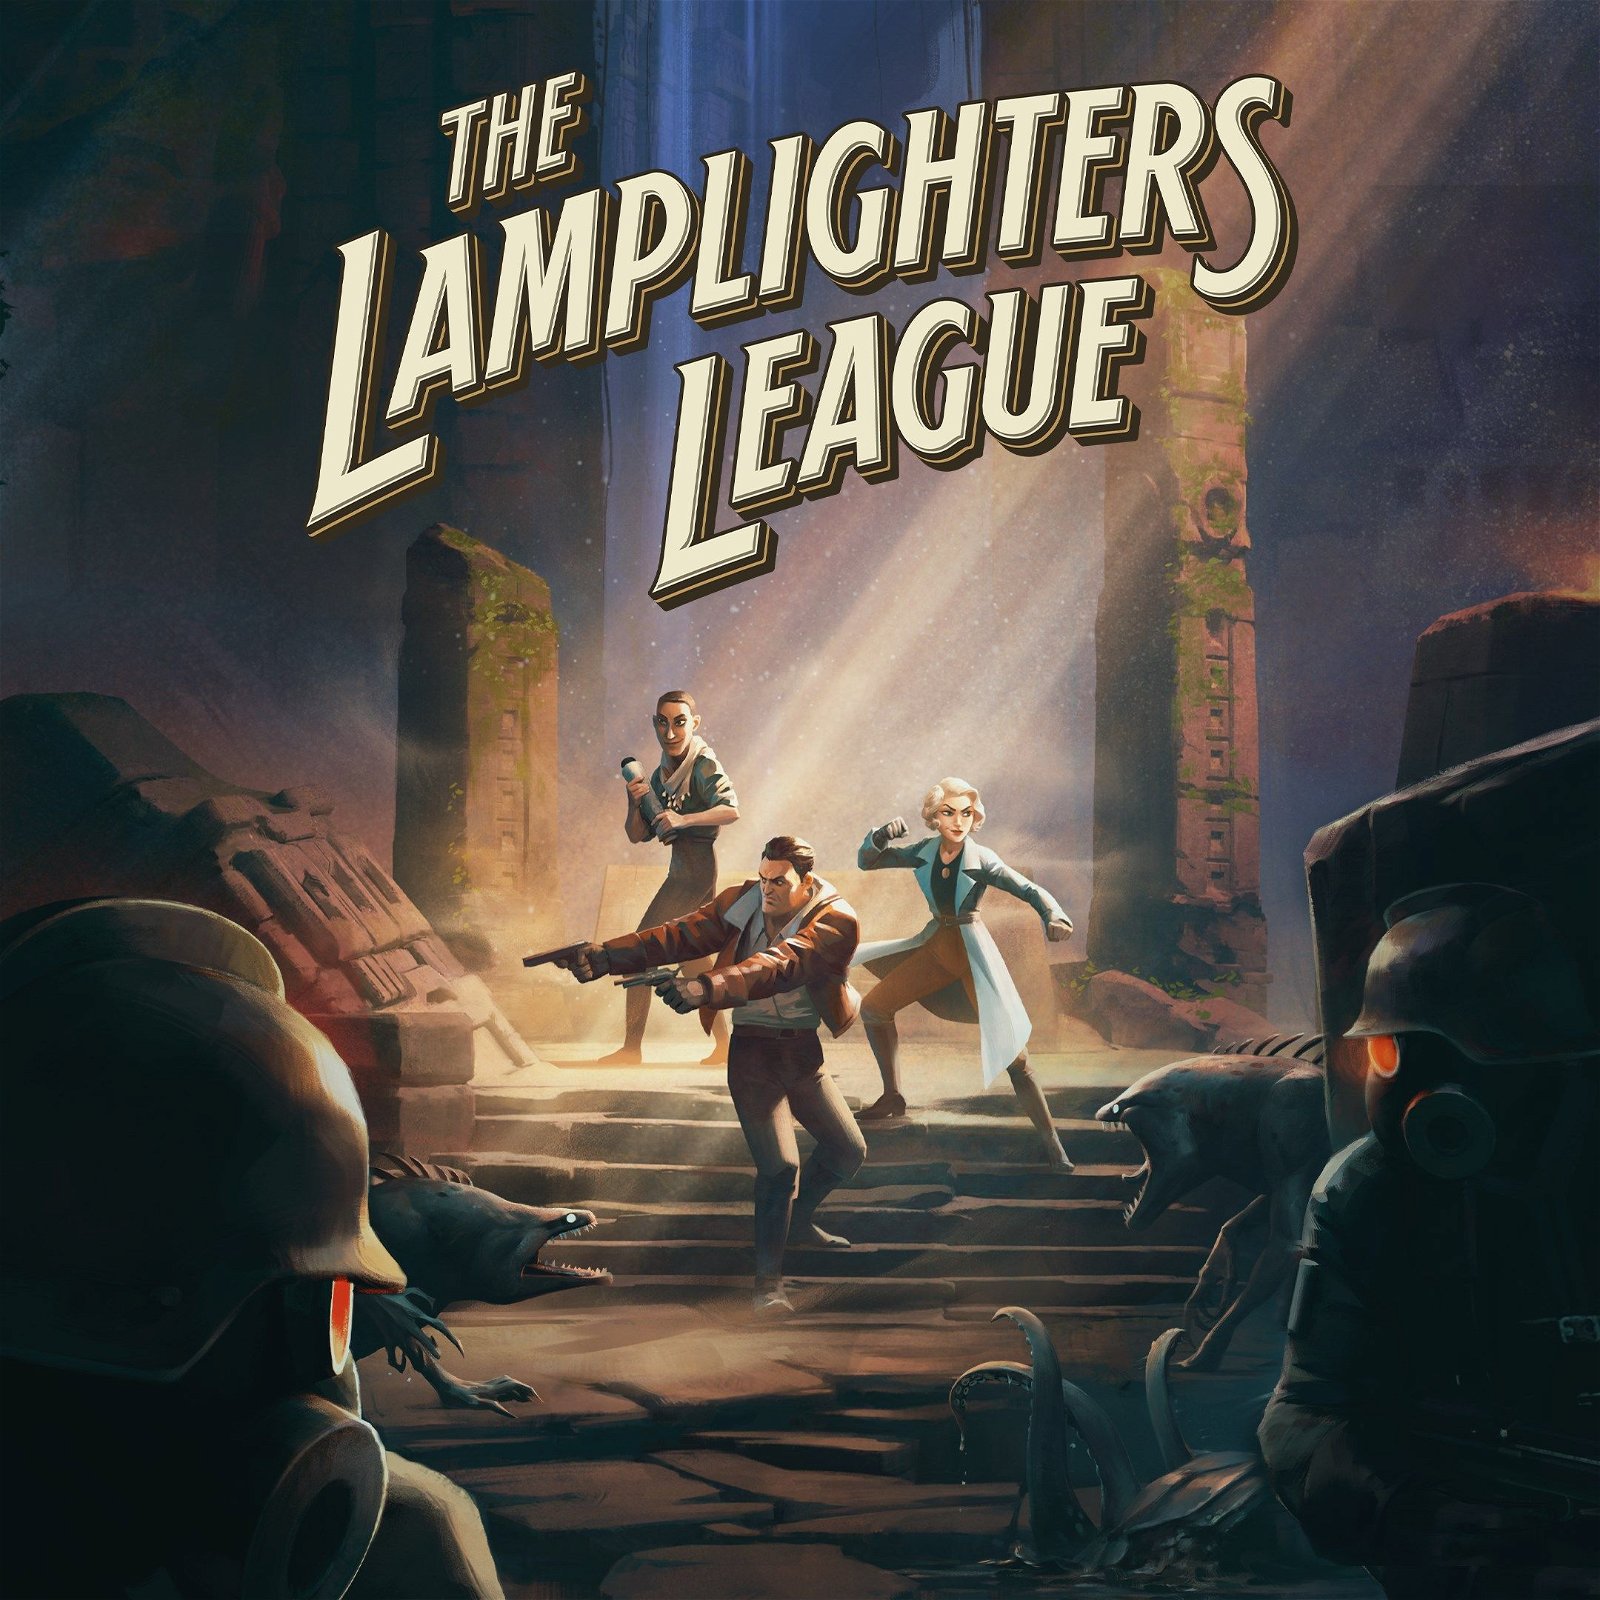 Image of The Lamplighters League - PC Edition